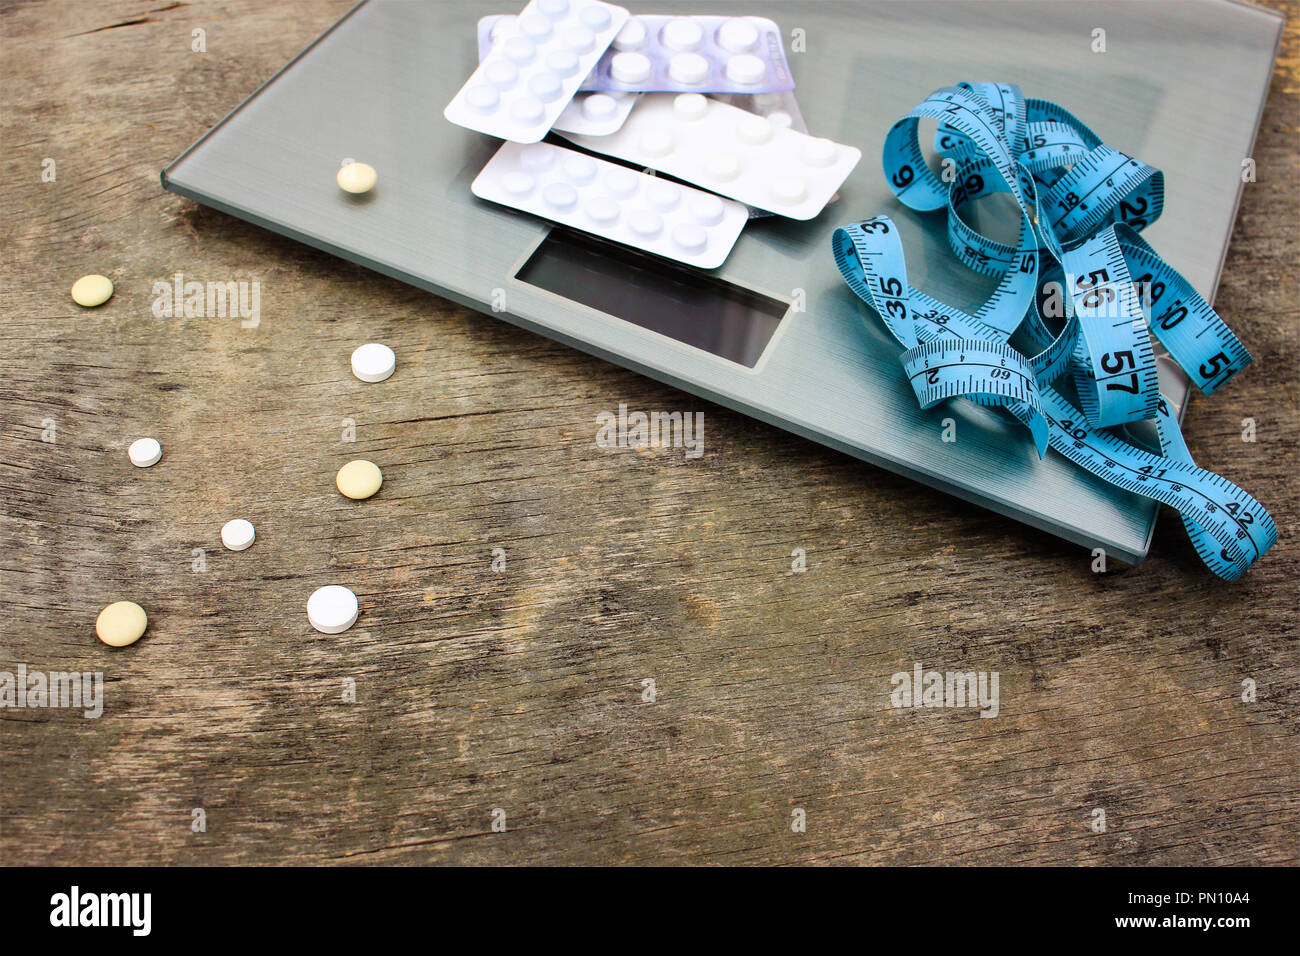 Measuring tape, pills and scales on wooden background. The concept of diet pills. Stock Photo